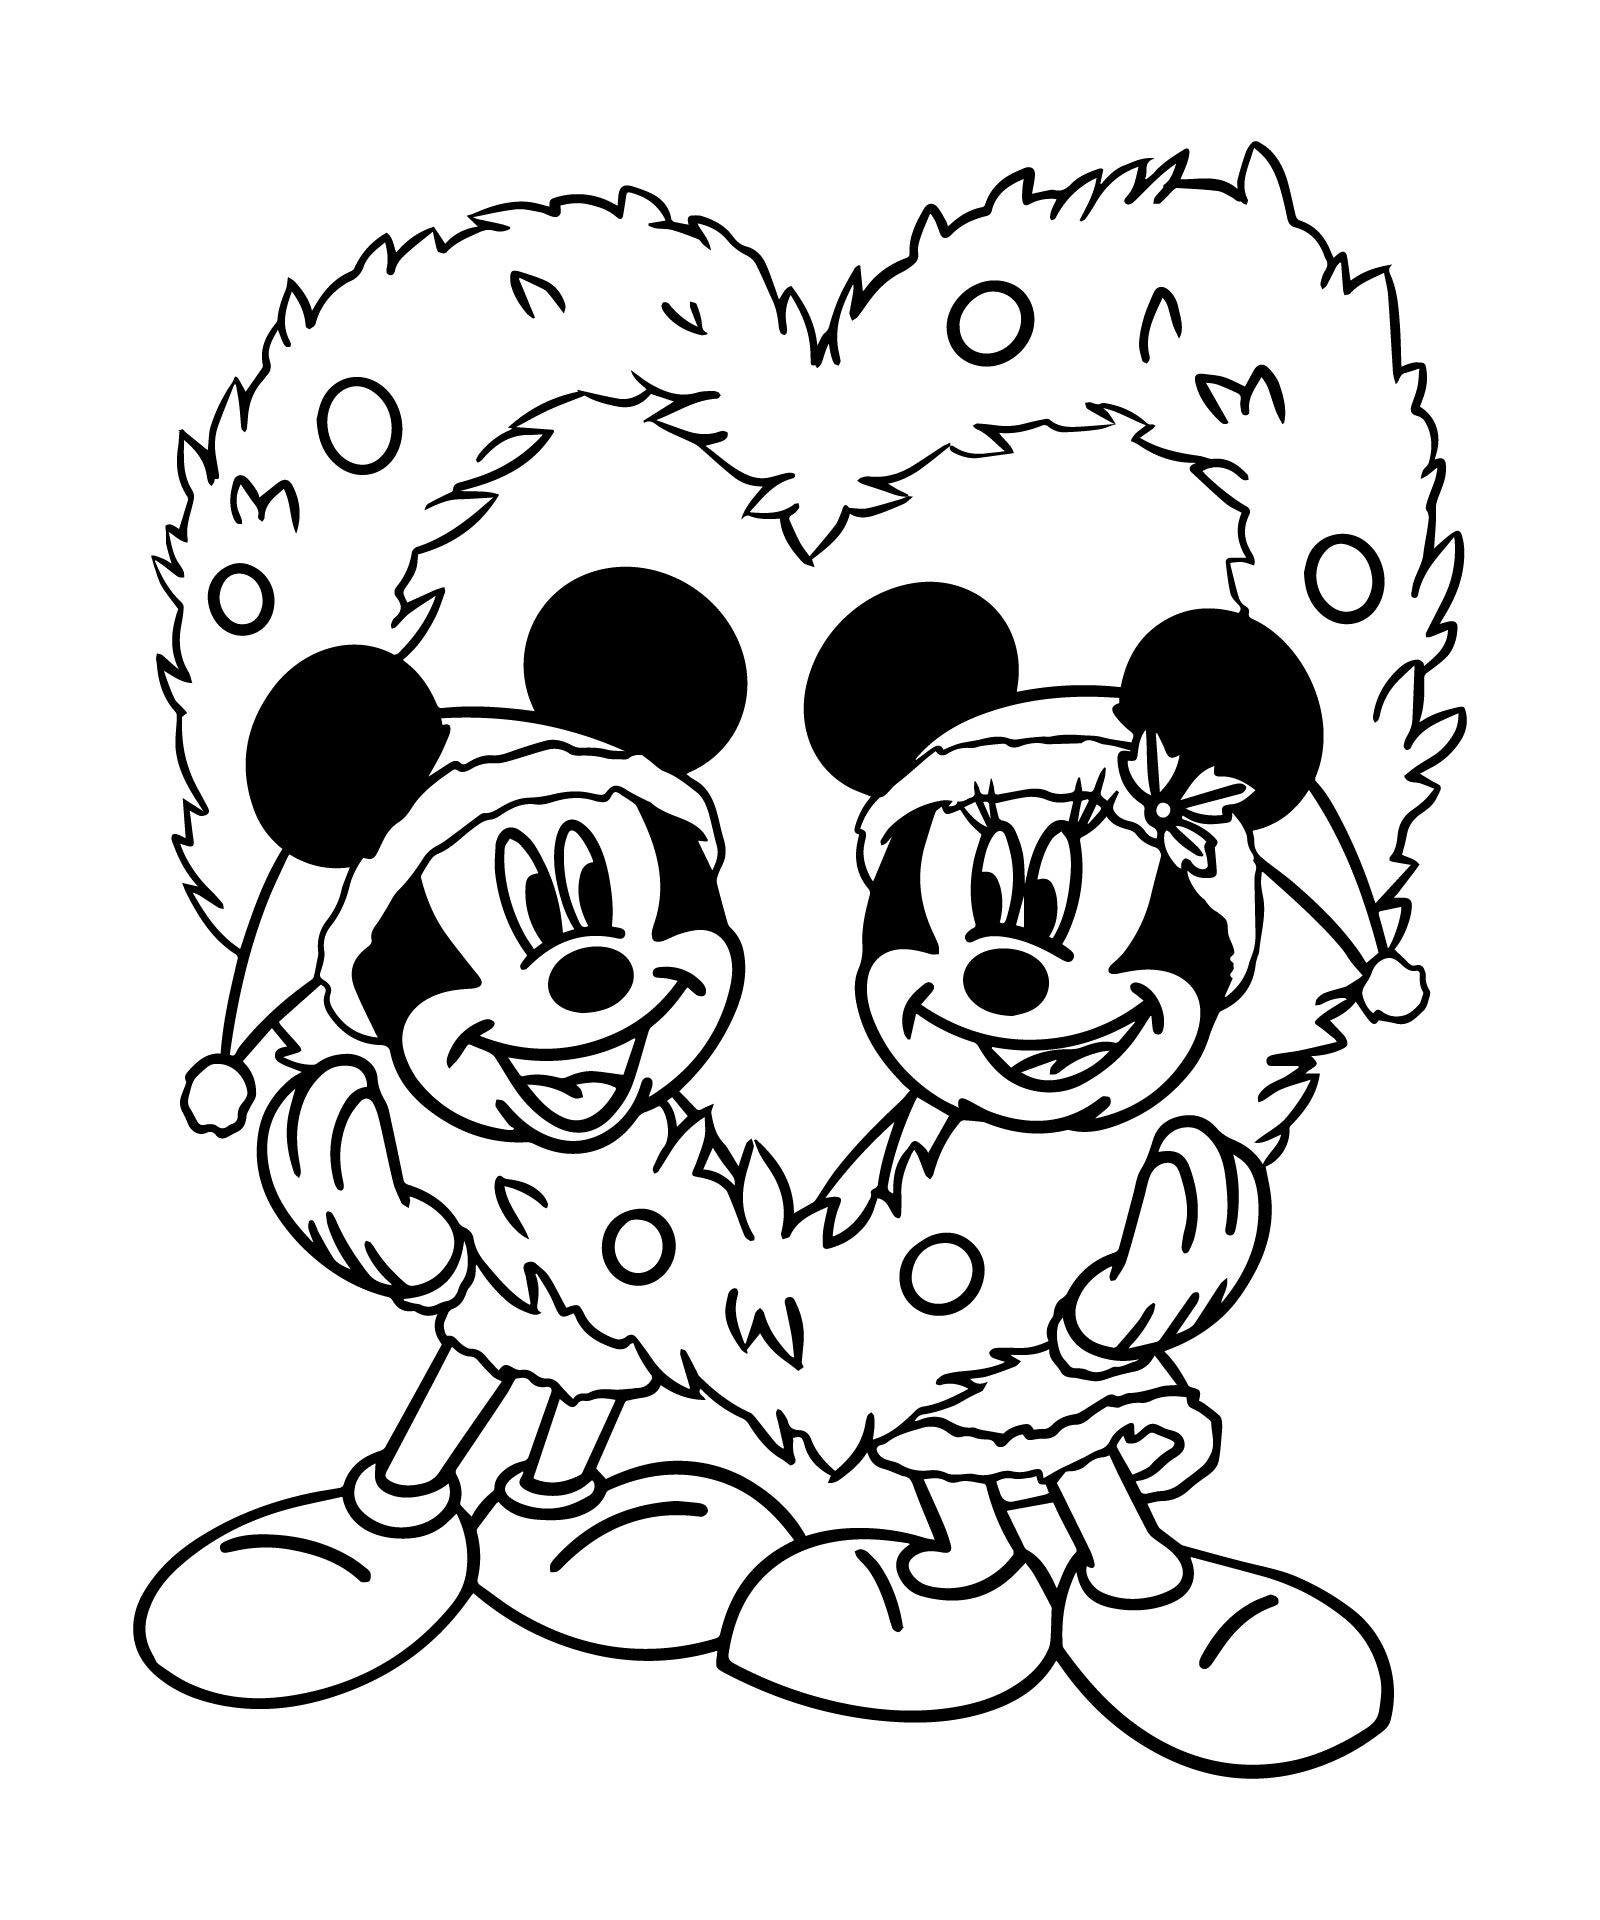 Printable Christmas Coloring Pages Mickey And Minnie